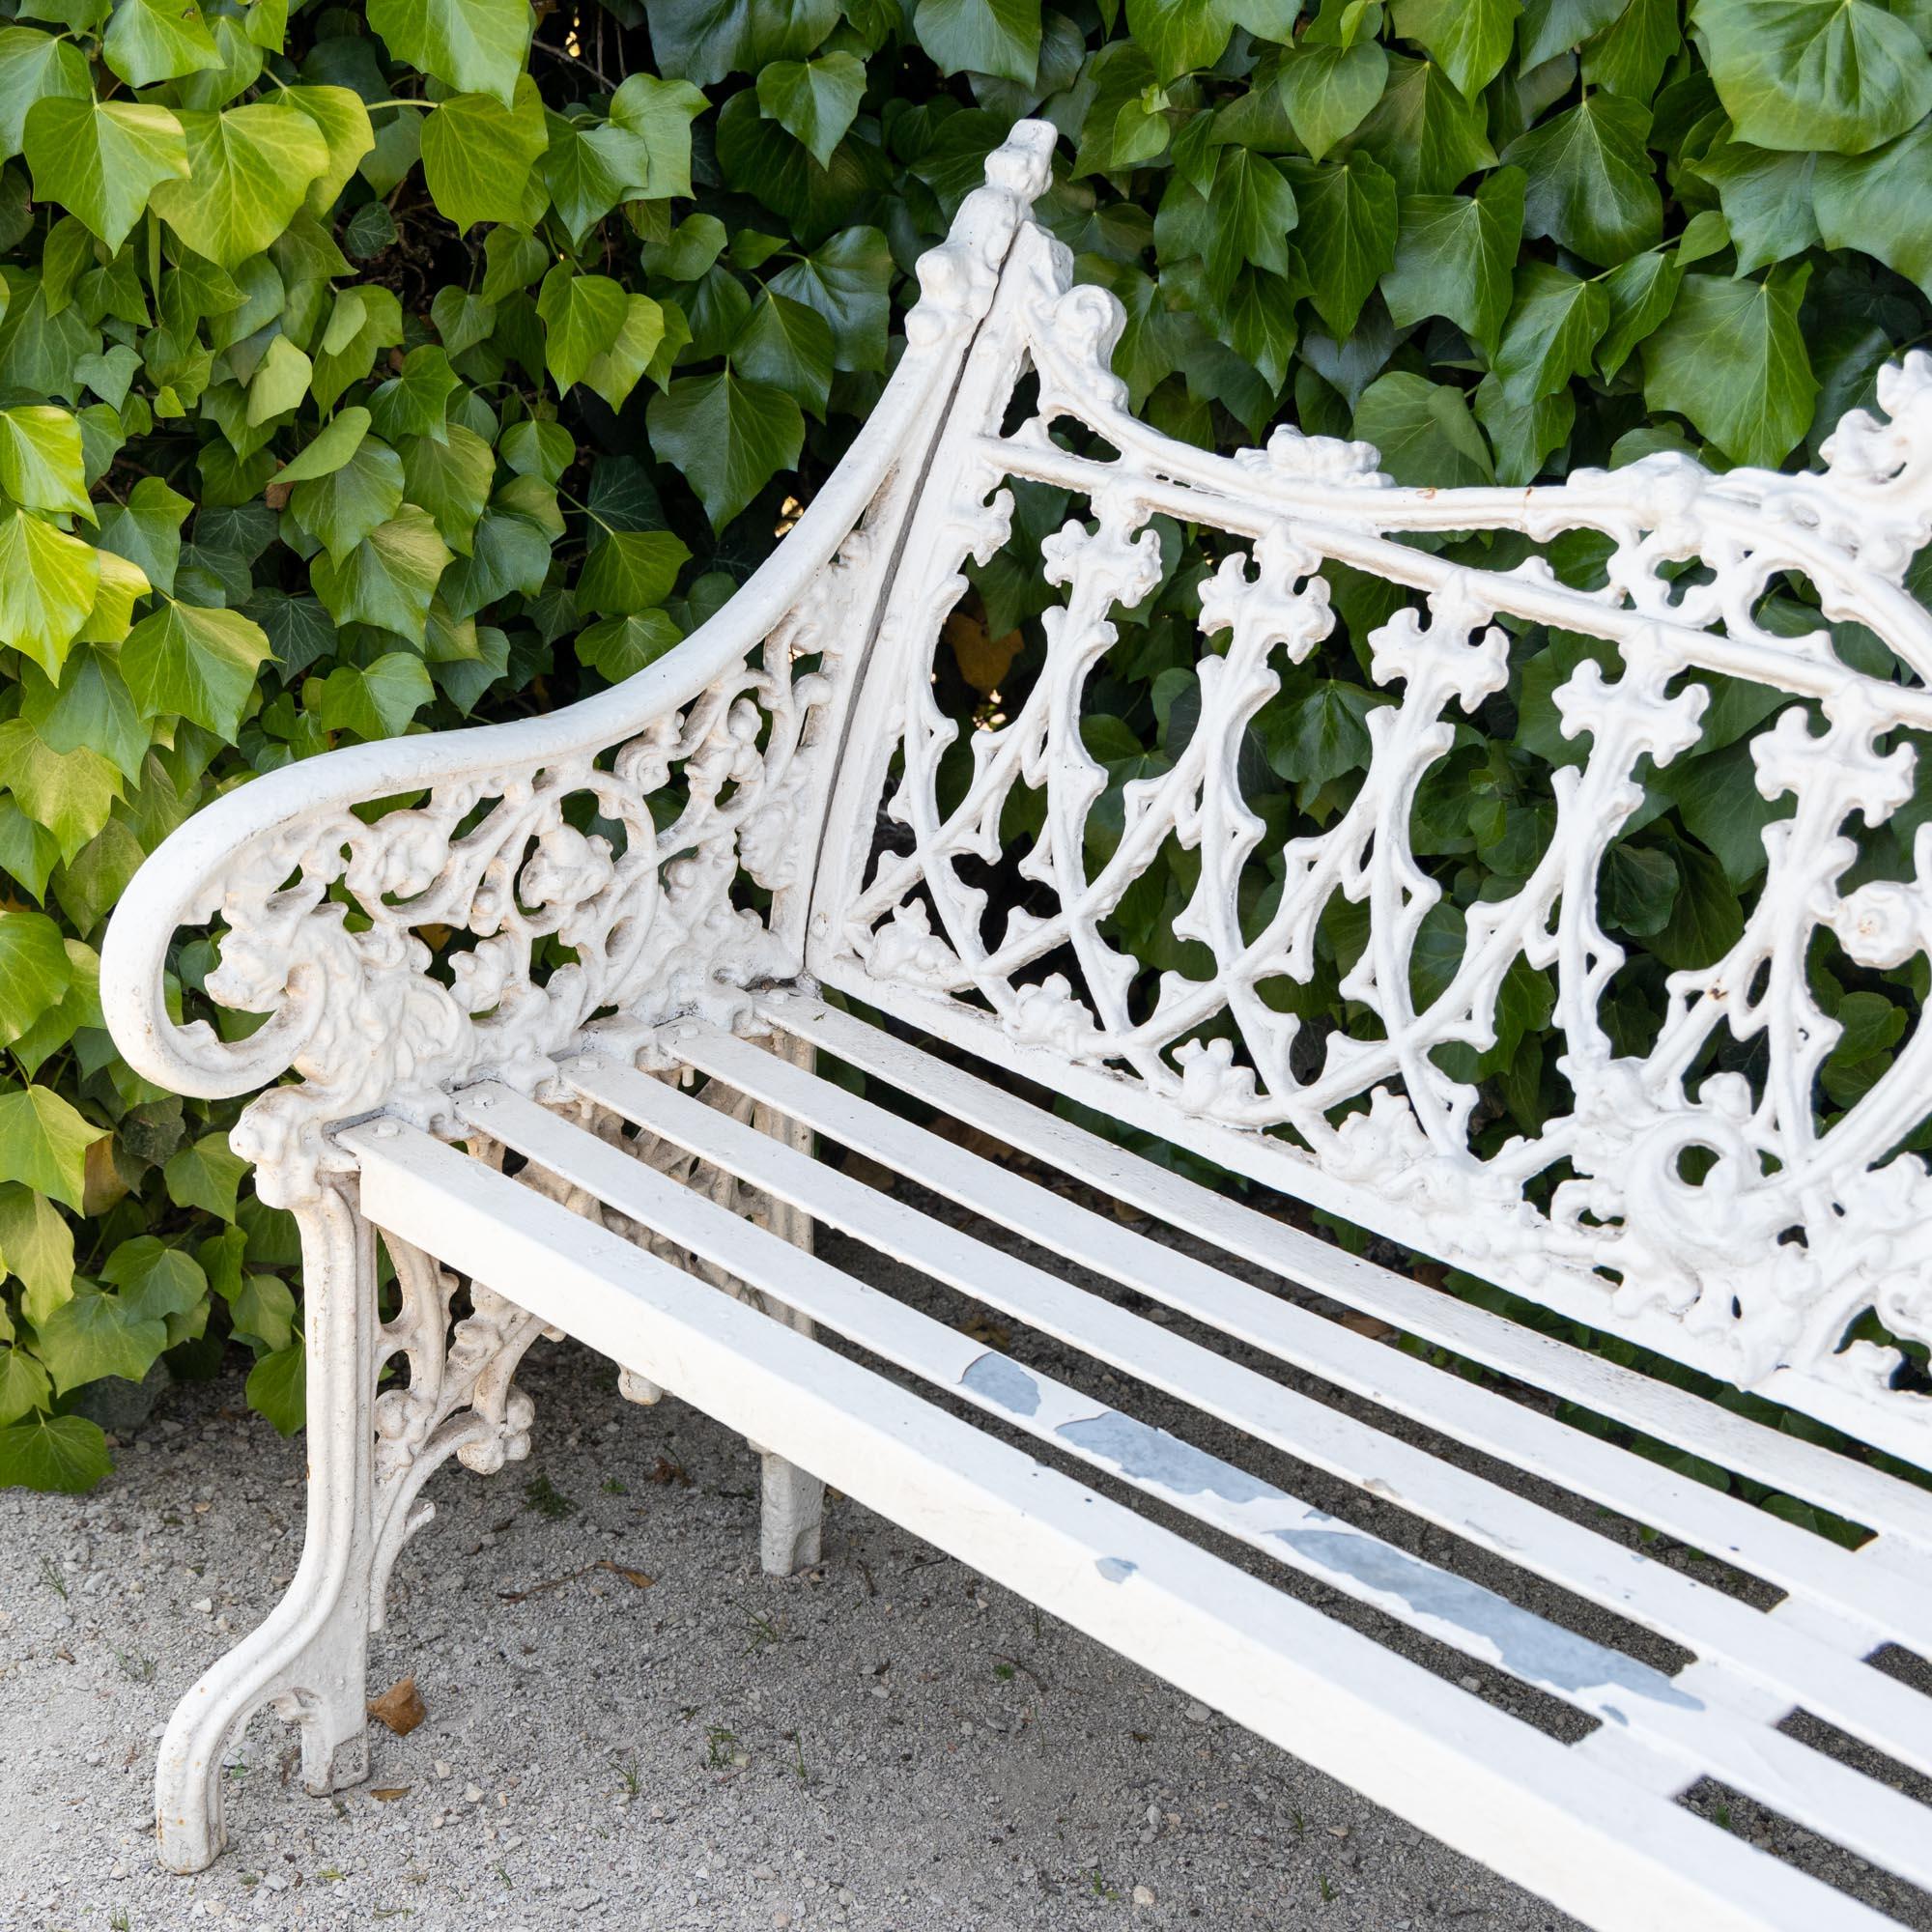 White lacquered cast iron garden bench in the neo-Gothic style of late 19th century Victorian garden furniture. The central medallion shows the Mexican heraldic eagle circumscribed by 